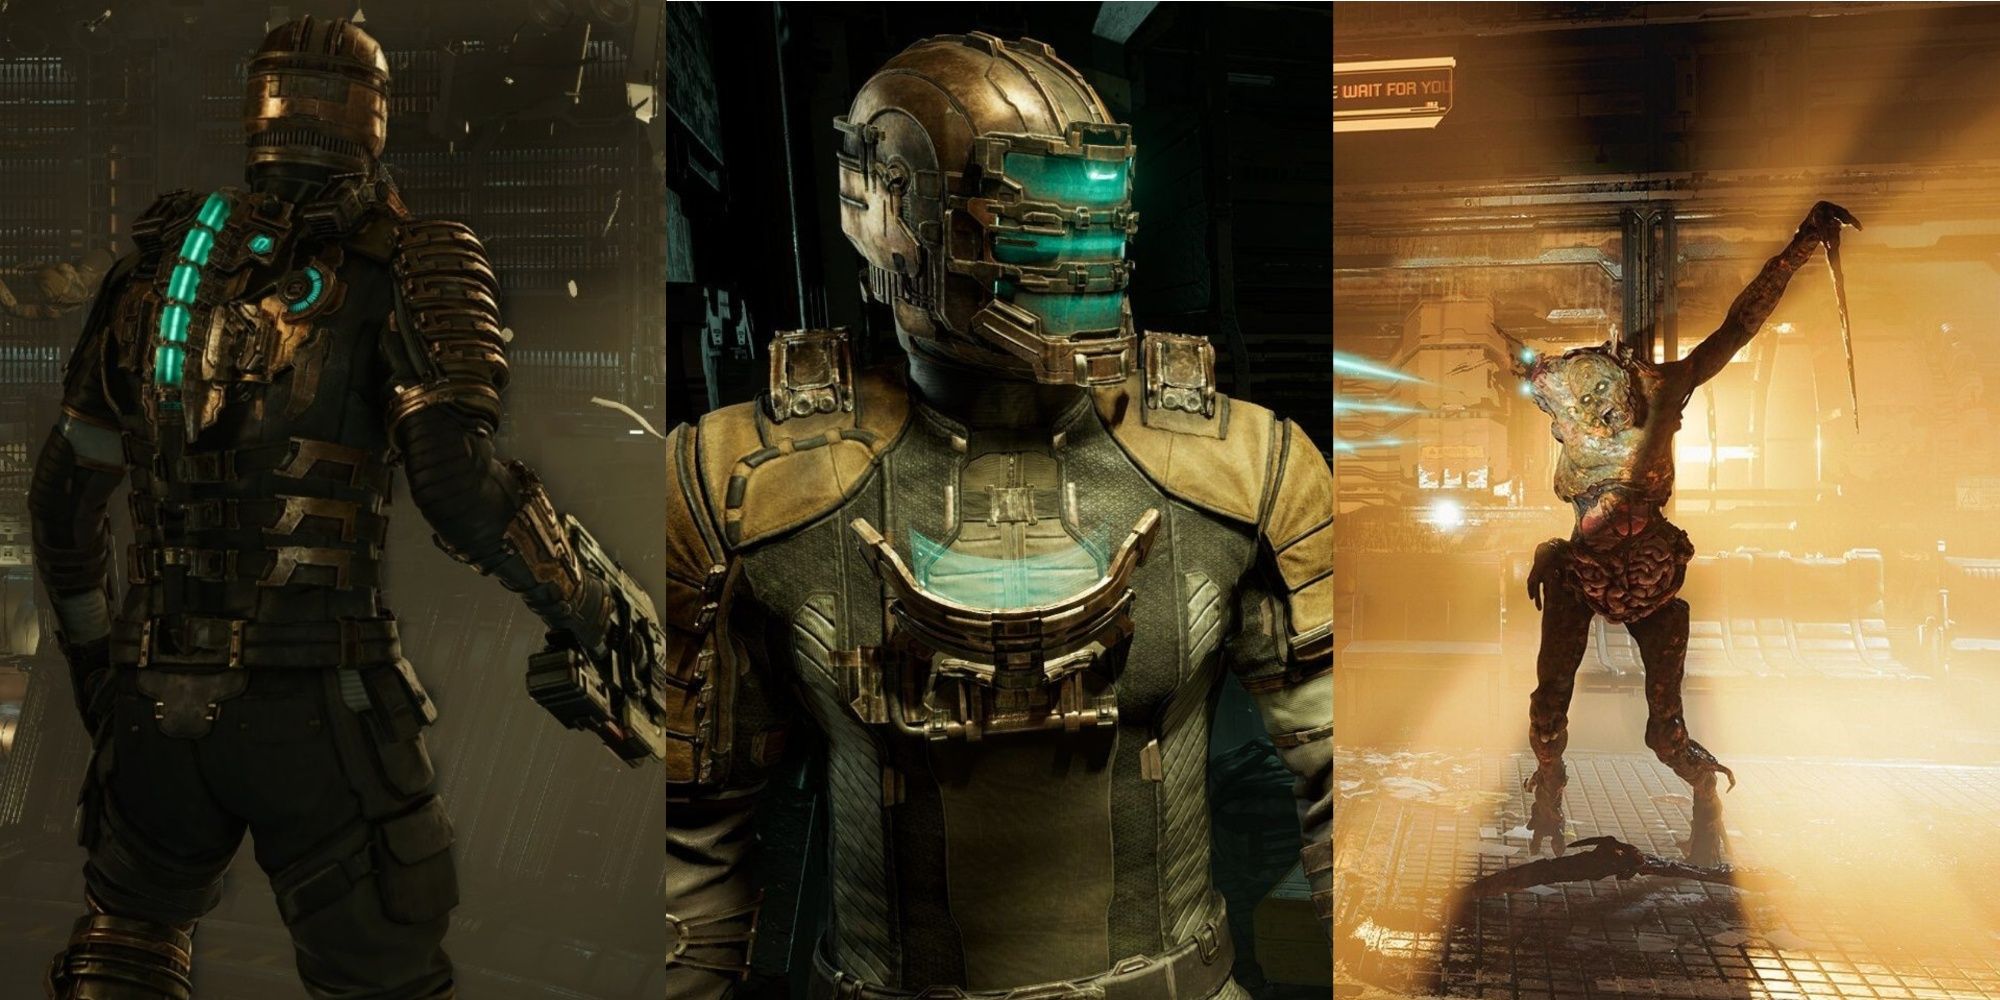 Dead Space collage featuring Isaac Clarke's back (left), Isaac facing the camera and looking over his shoulder (center) and a Necromorph attacking (right)